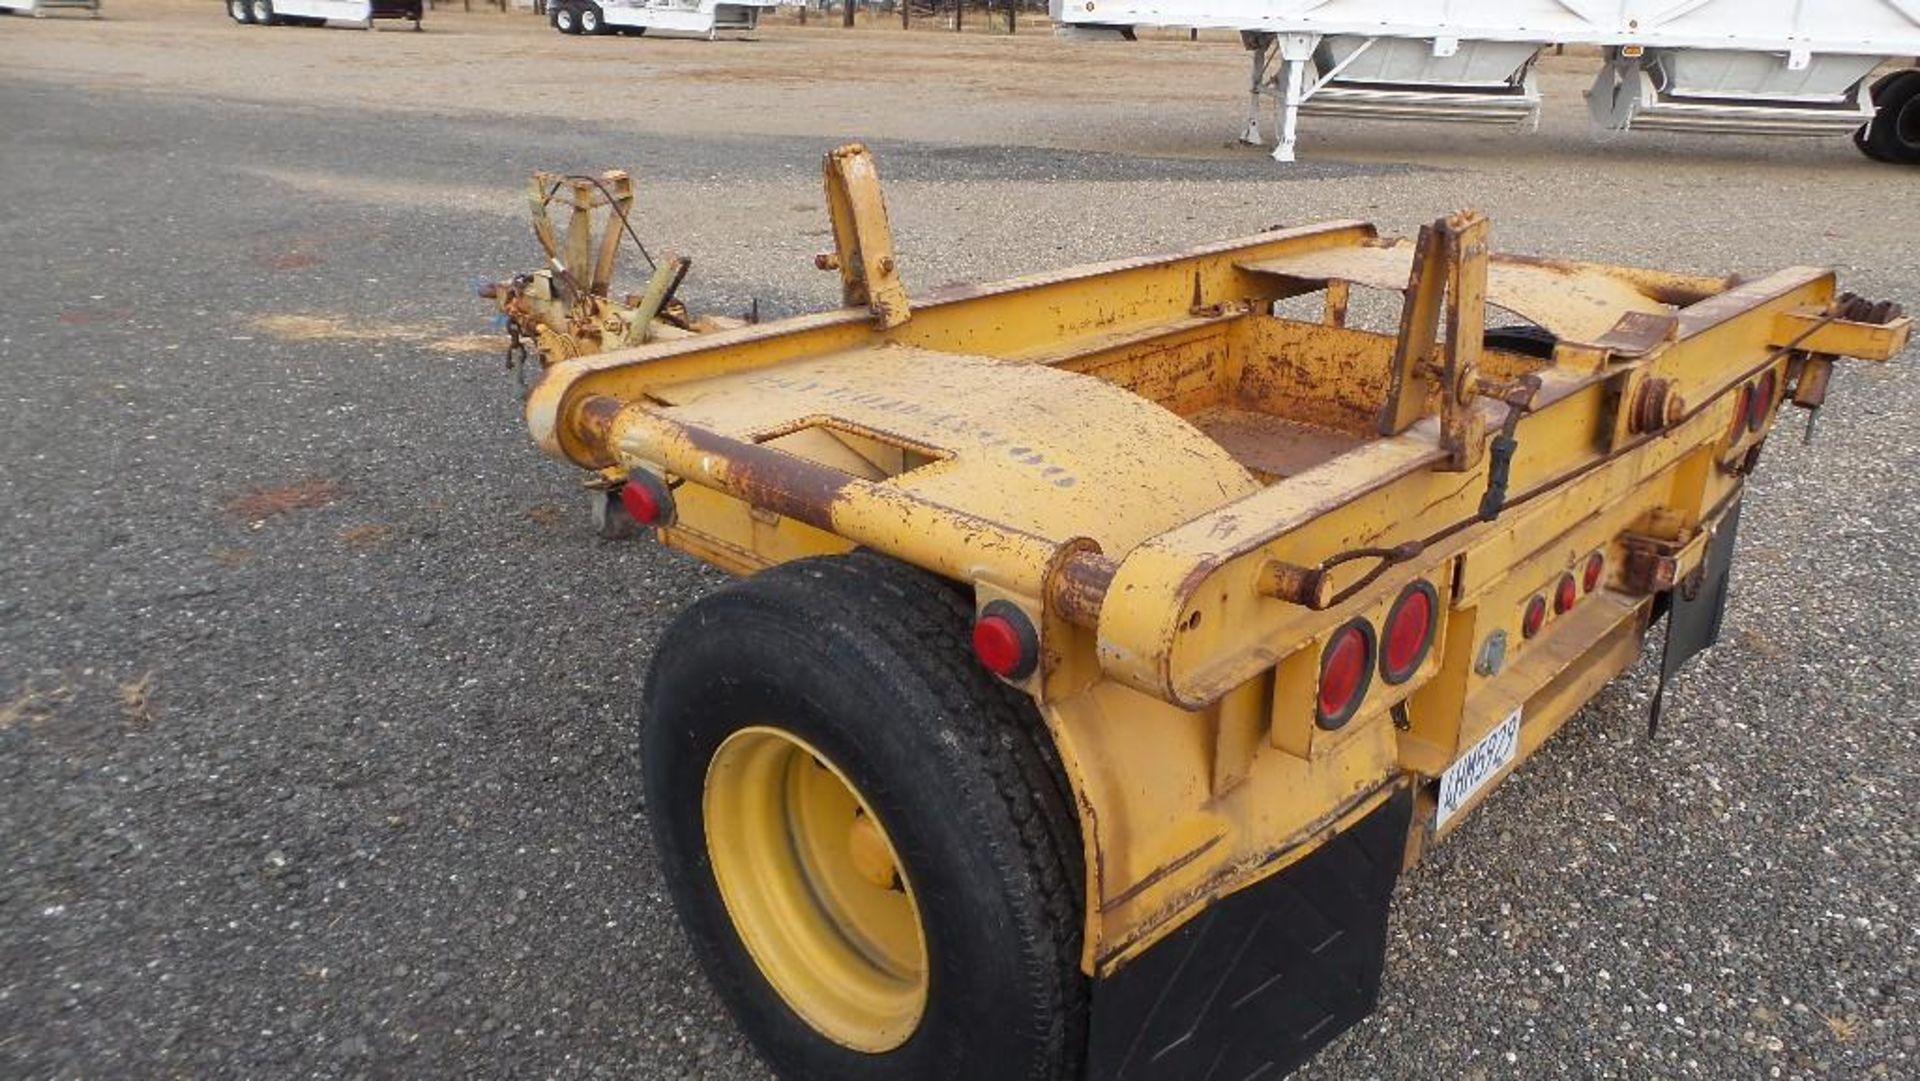 Pole trailer with dual wheels airbrakes and hydraulic tongue jack - Image 7 of 8